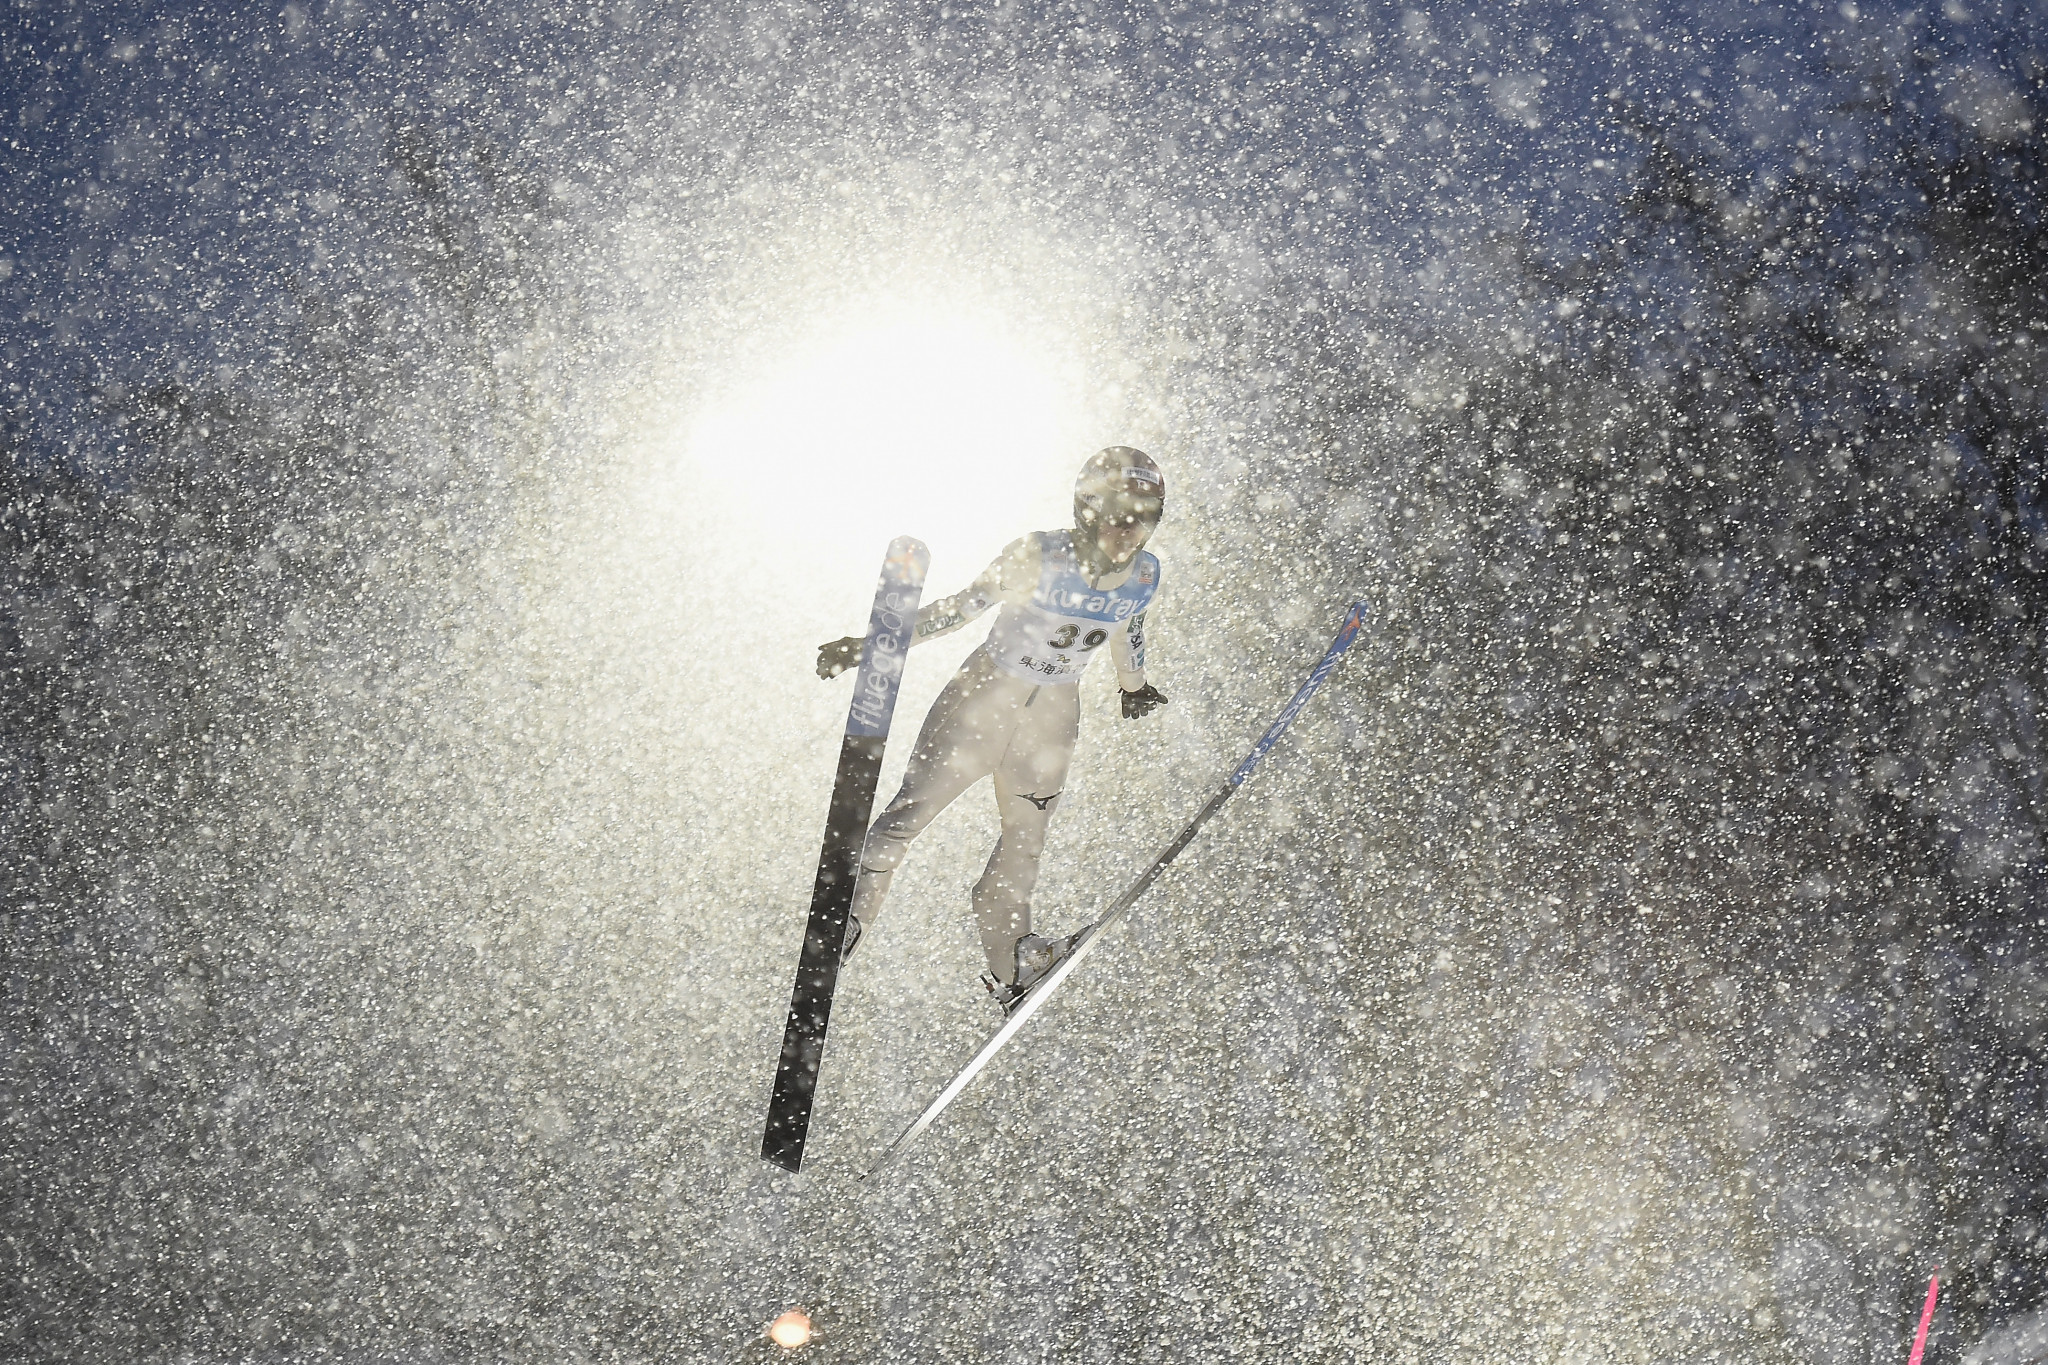 High winds and snowfall force qualifying postponement at FIS Women's Ski Jumping World Cup